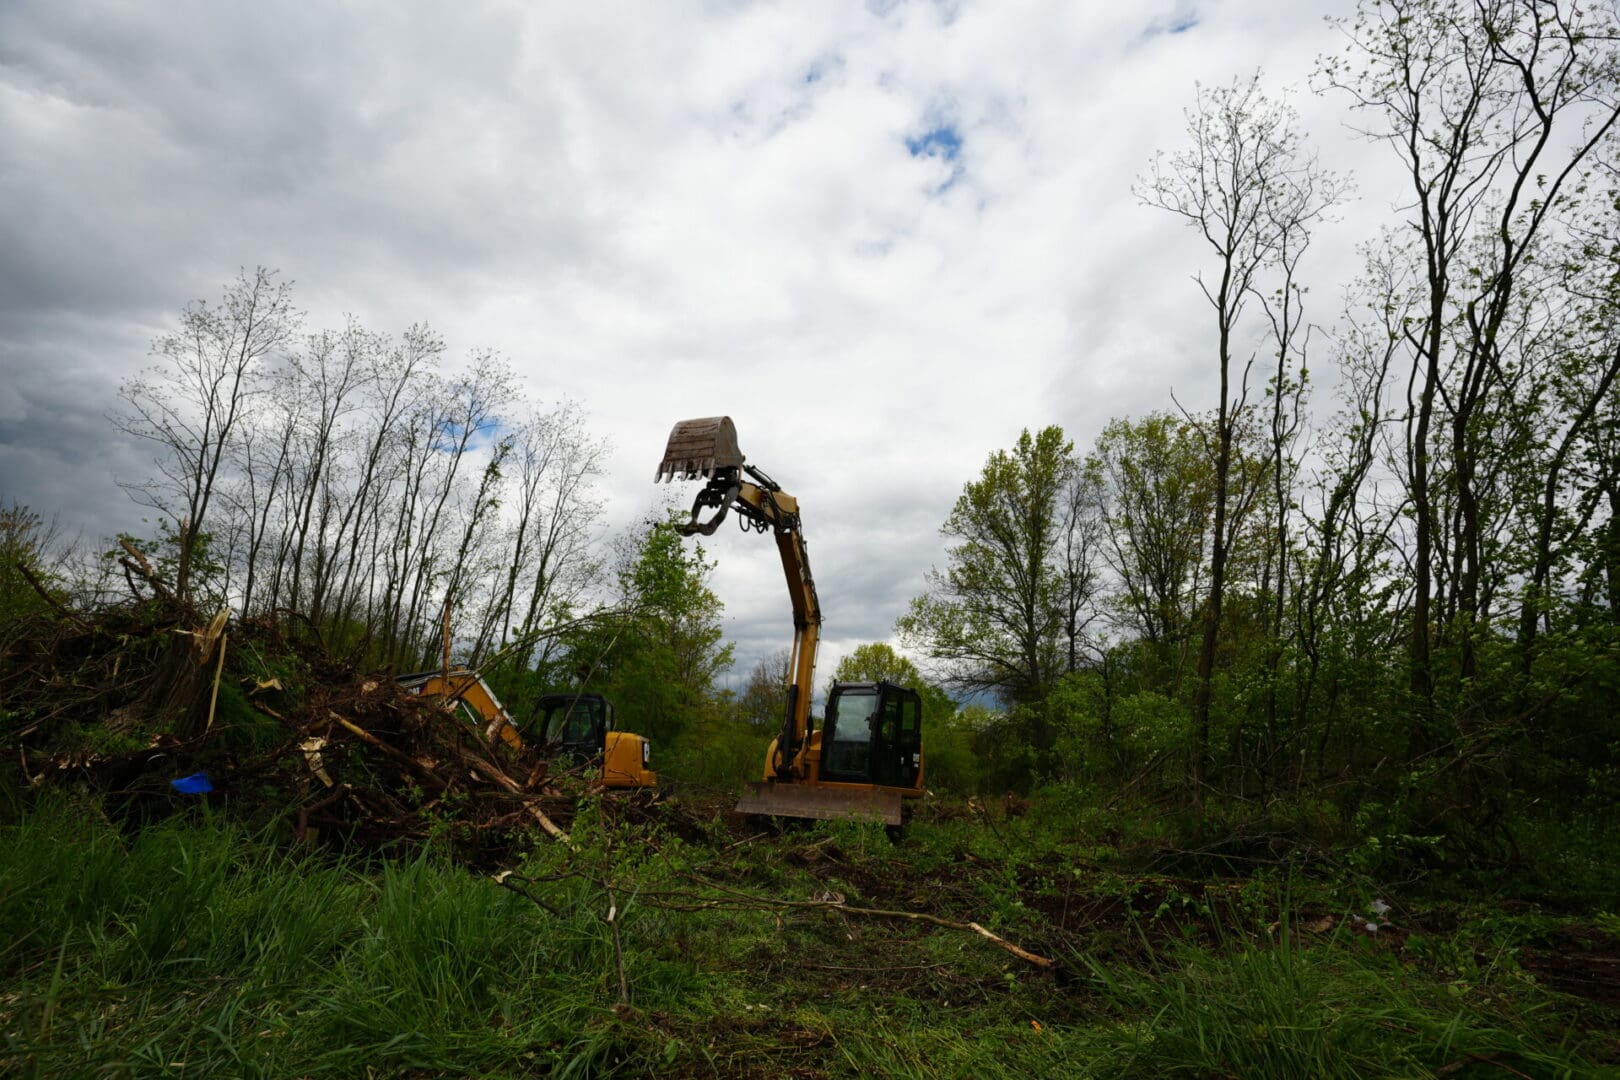 A bulldozer is performing site work in a wooded area.